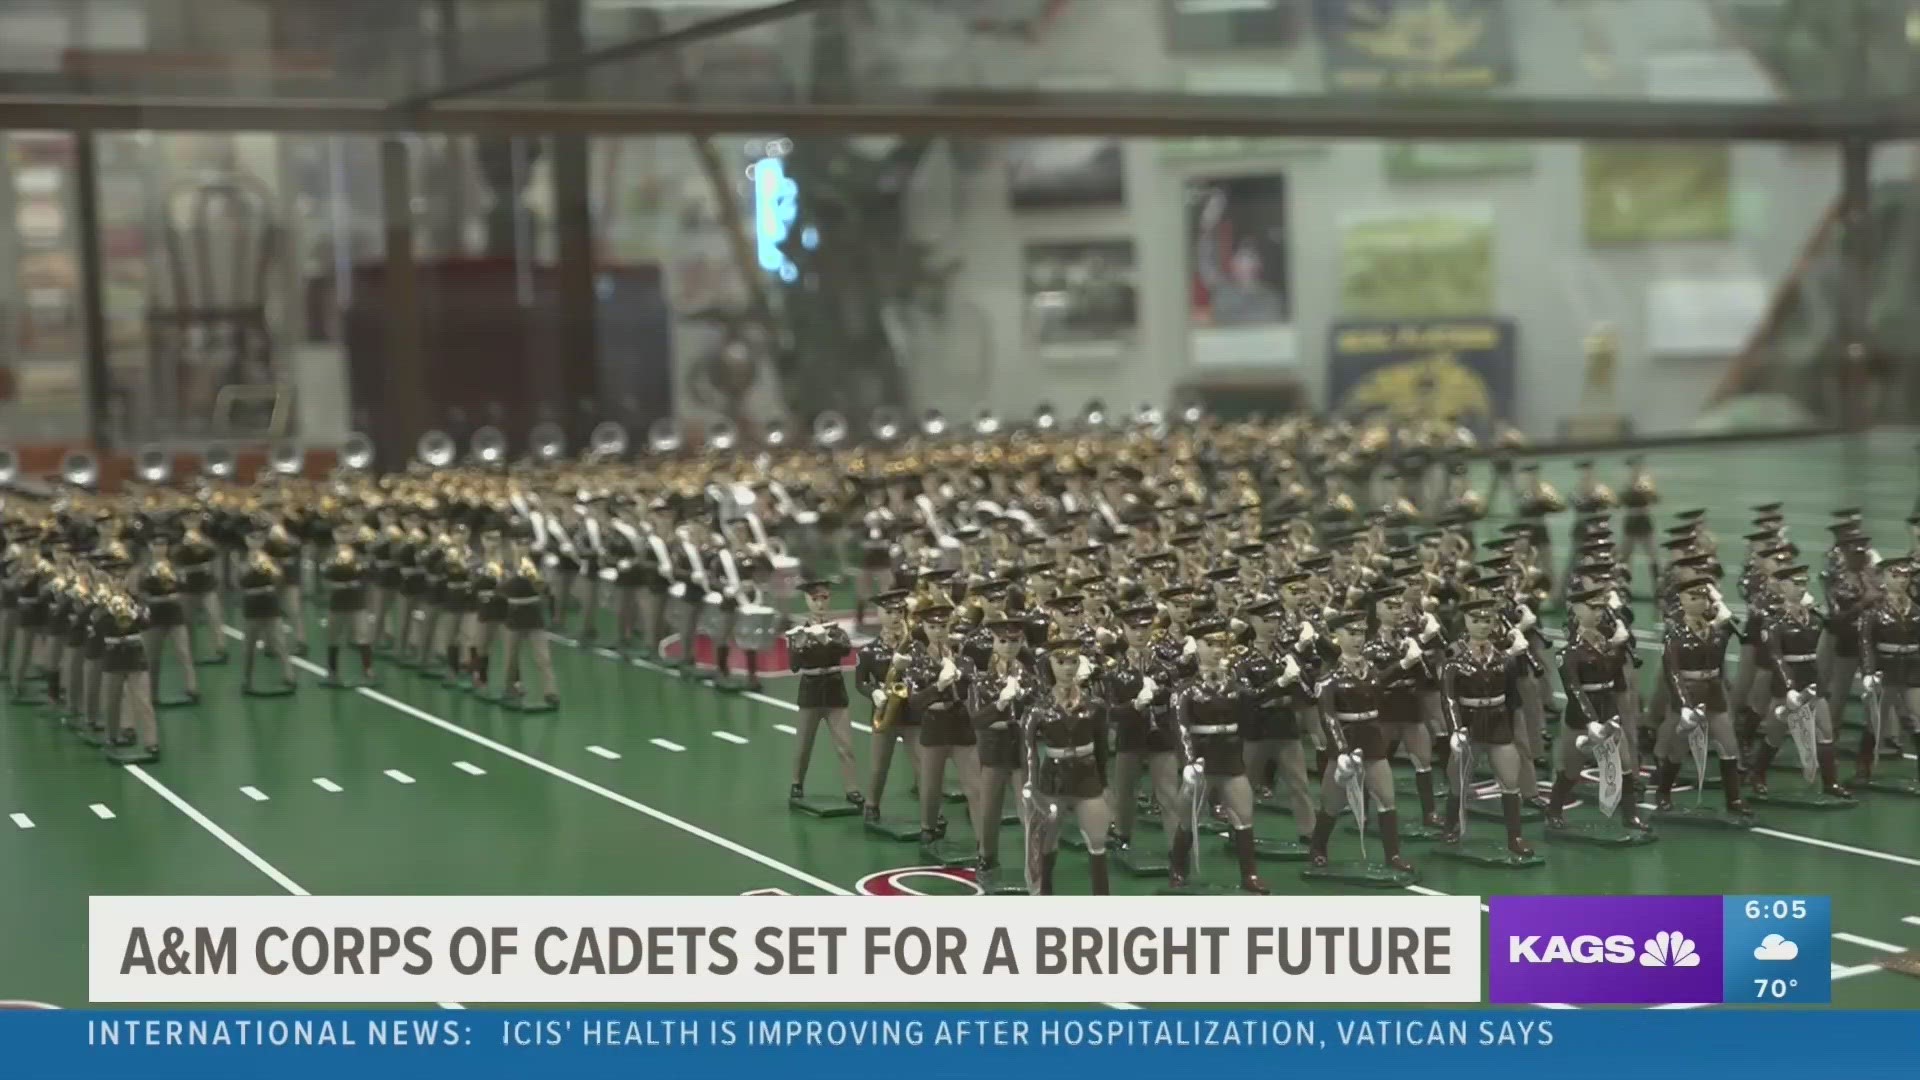 There has been a lot of change over the past year for the Corps of Cadets at Texas A&M, including new leadership and an initiative to grow the organization.